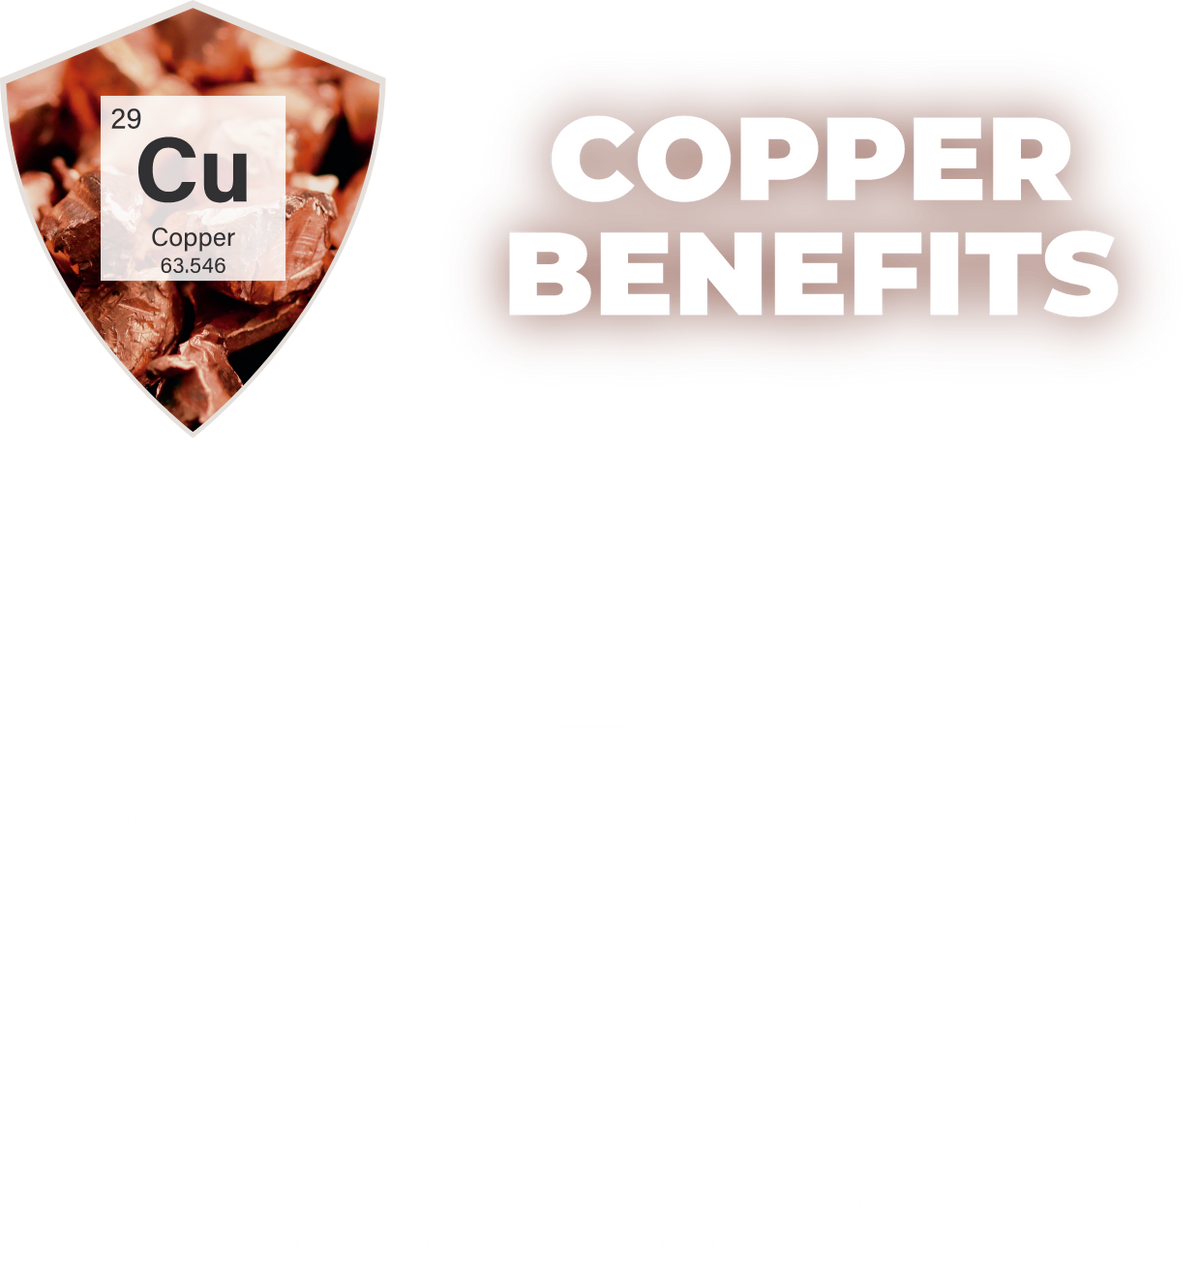 graphic showing the copper benefits: antibacterial, cooling comfort overall well-being, maintaining healthy collagen levels, and may help to reduce inflammation